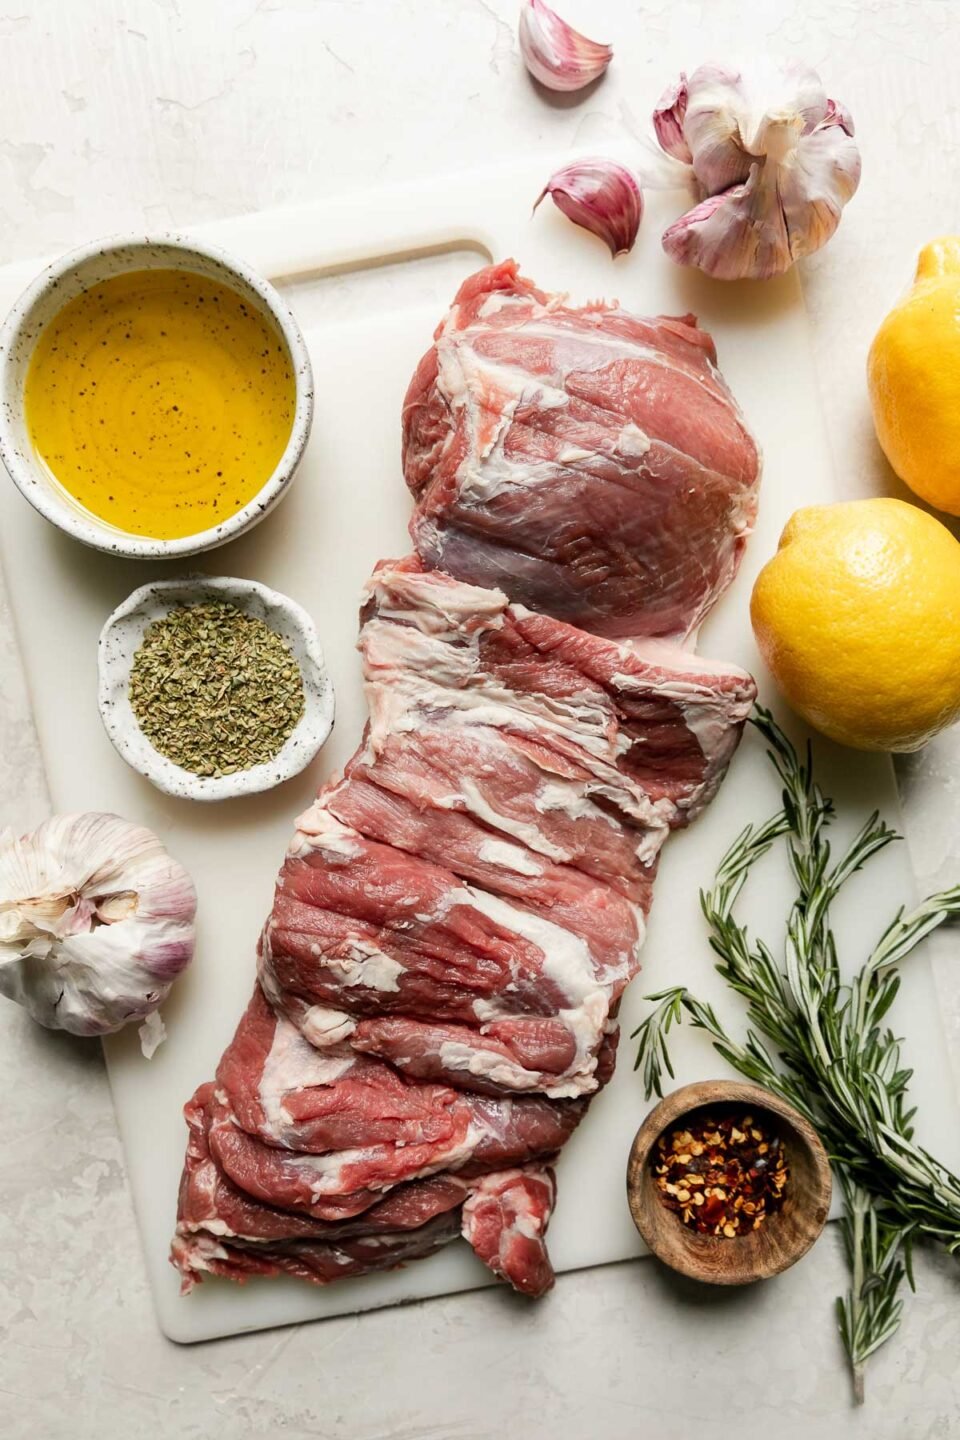 Butterflied grilled leg of lamb ingredients arranged on a creamy white textured surface: boneless leg of lamb, olive oil, lemons, garlic, fresh rosemary, dried oregano, crushed red pepper flakes, kosher salt, and ground black pepper.